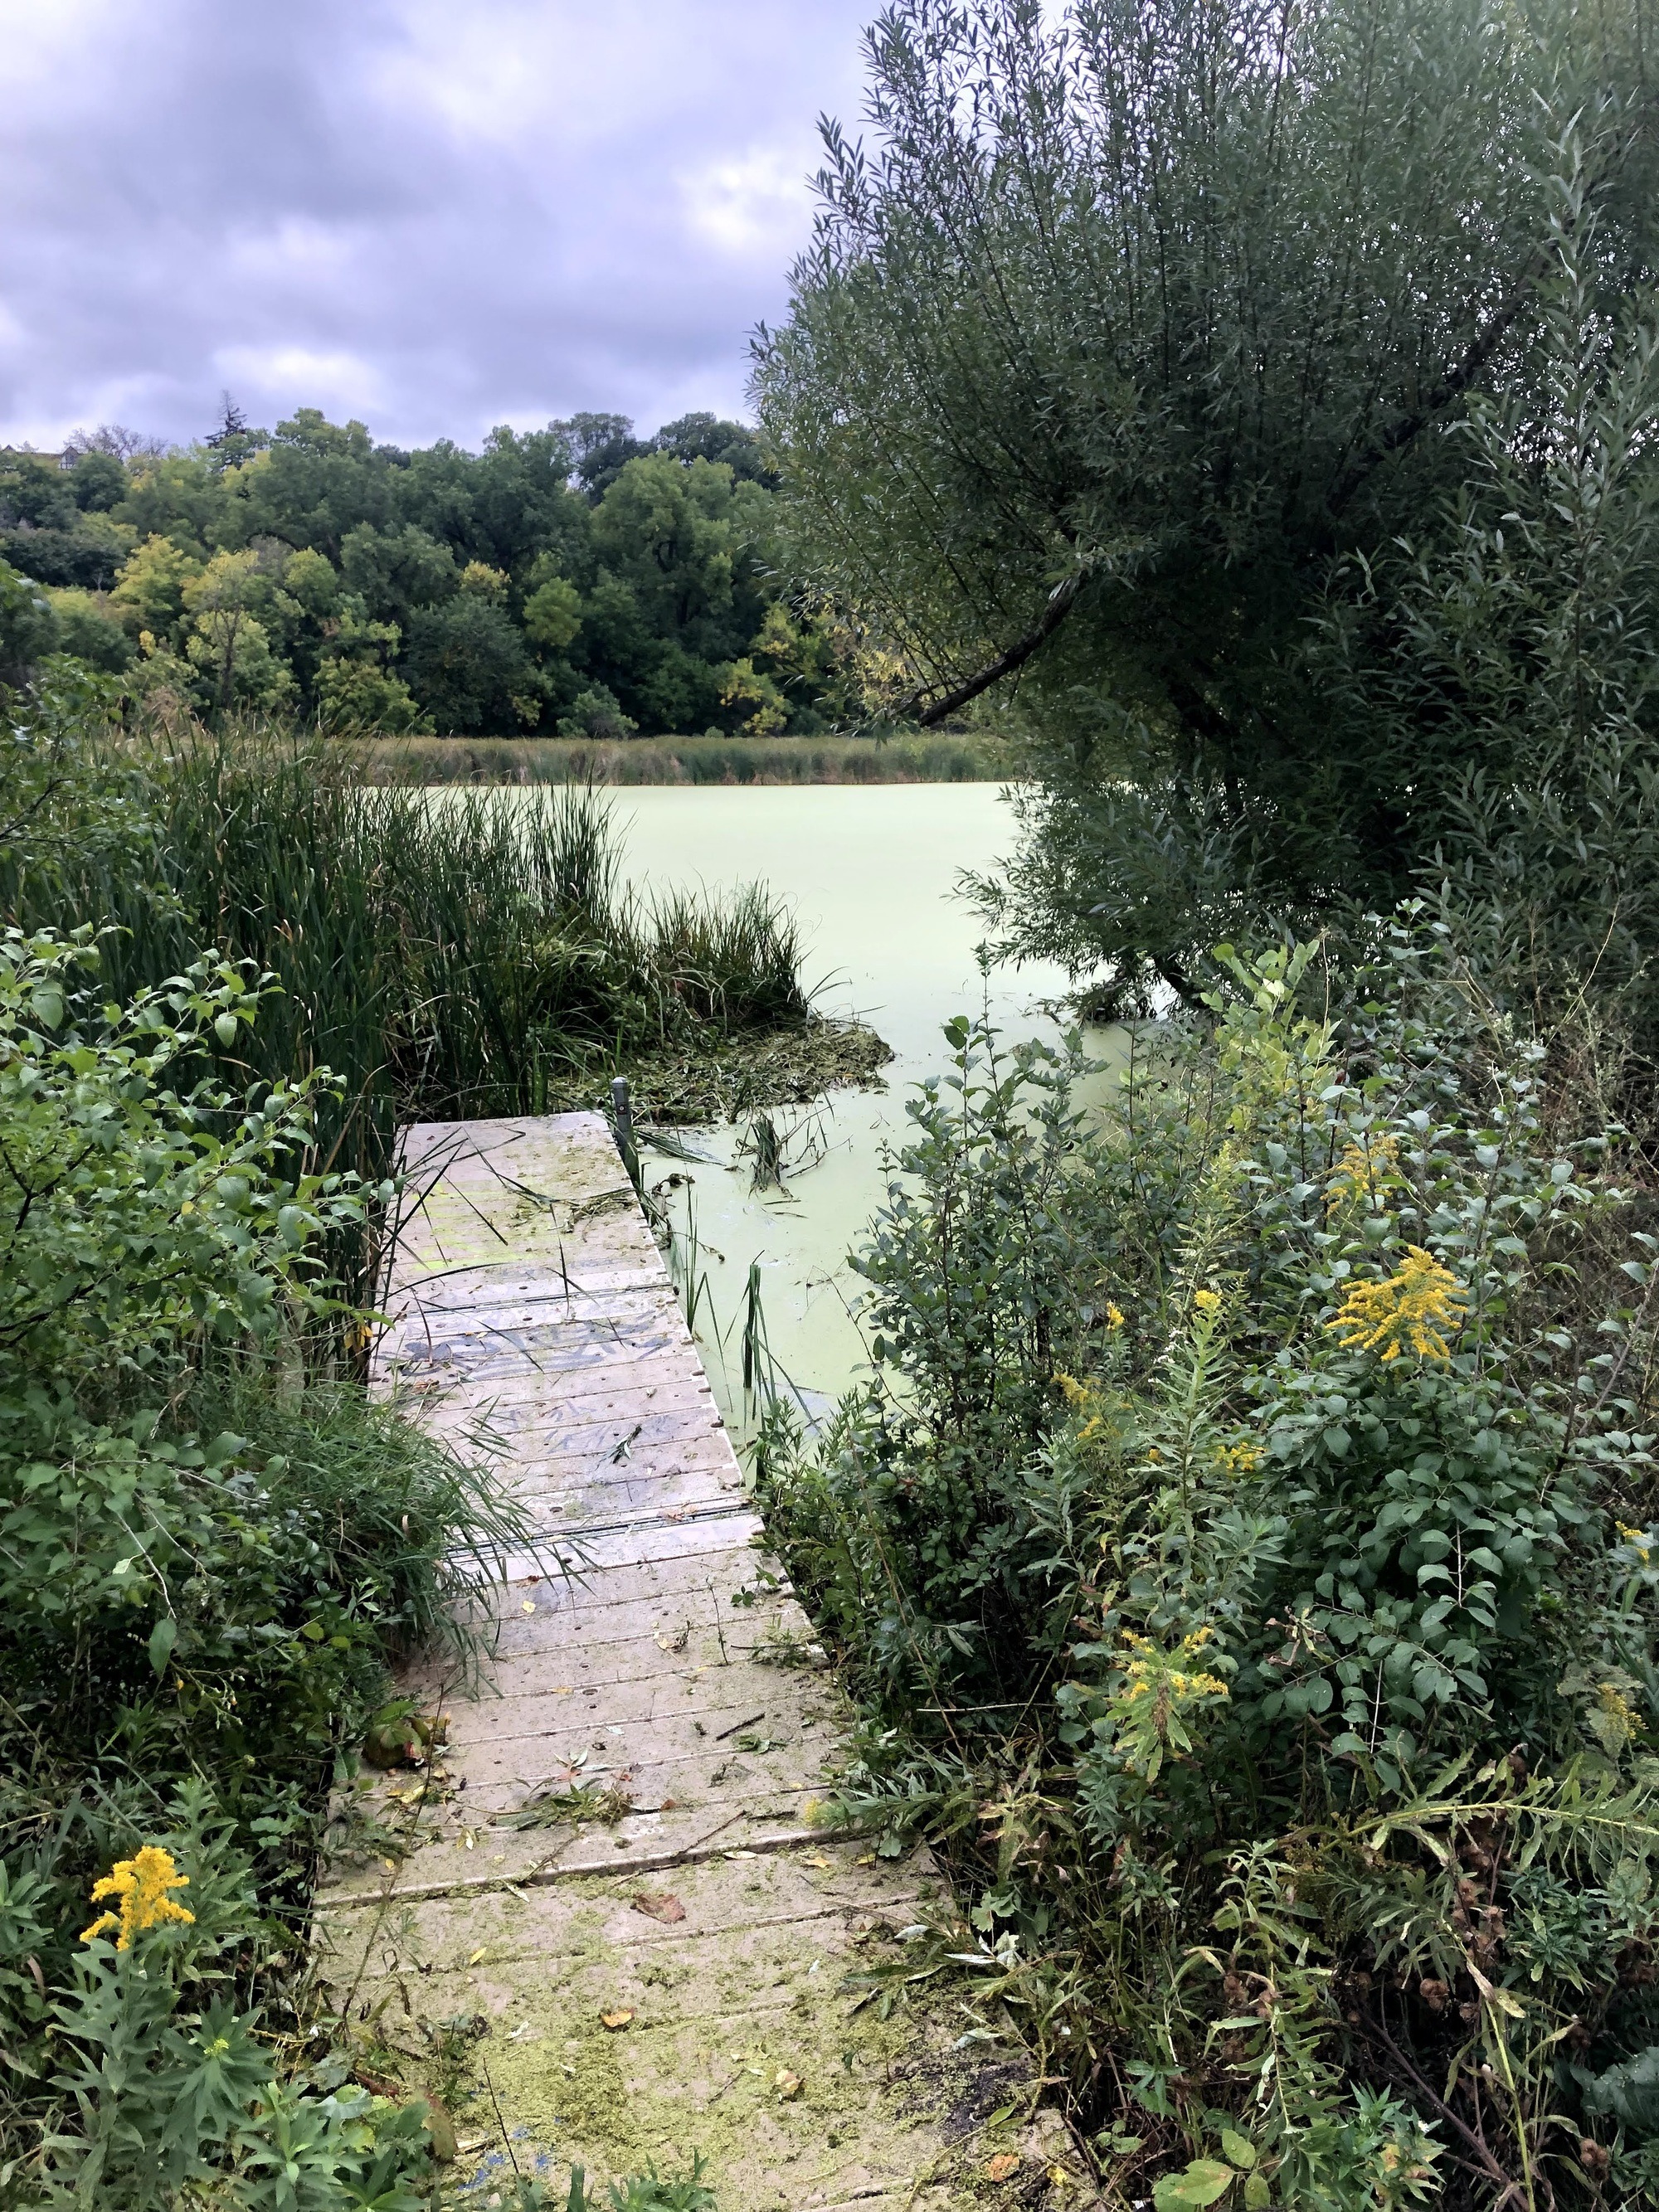 Image of dock and plants leading to pond. Surface of pond is green with duckweed on it. Tree overhanging on the right of photo and island of plants in the pond on the left.